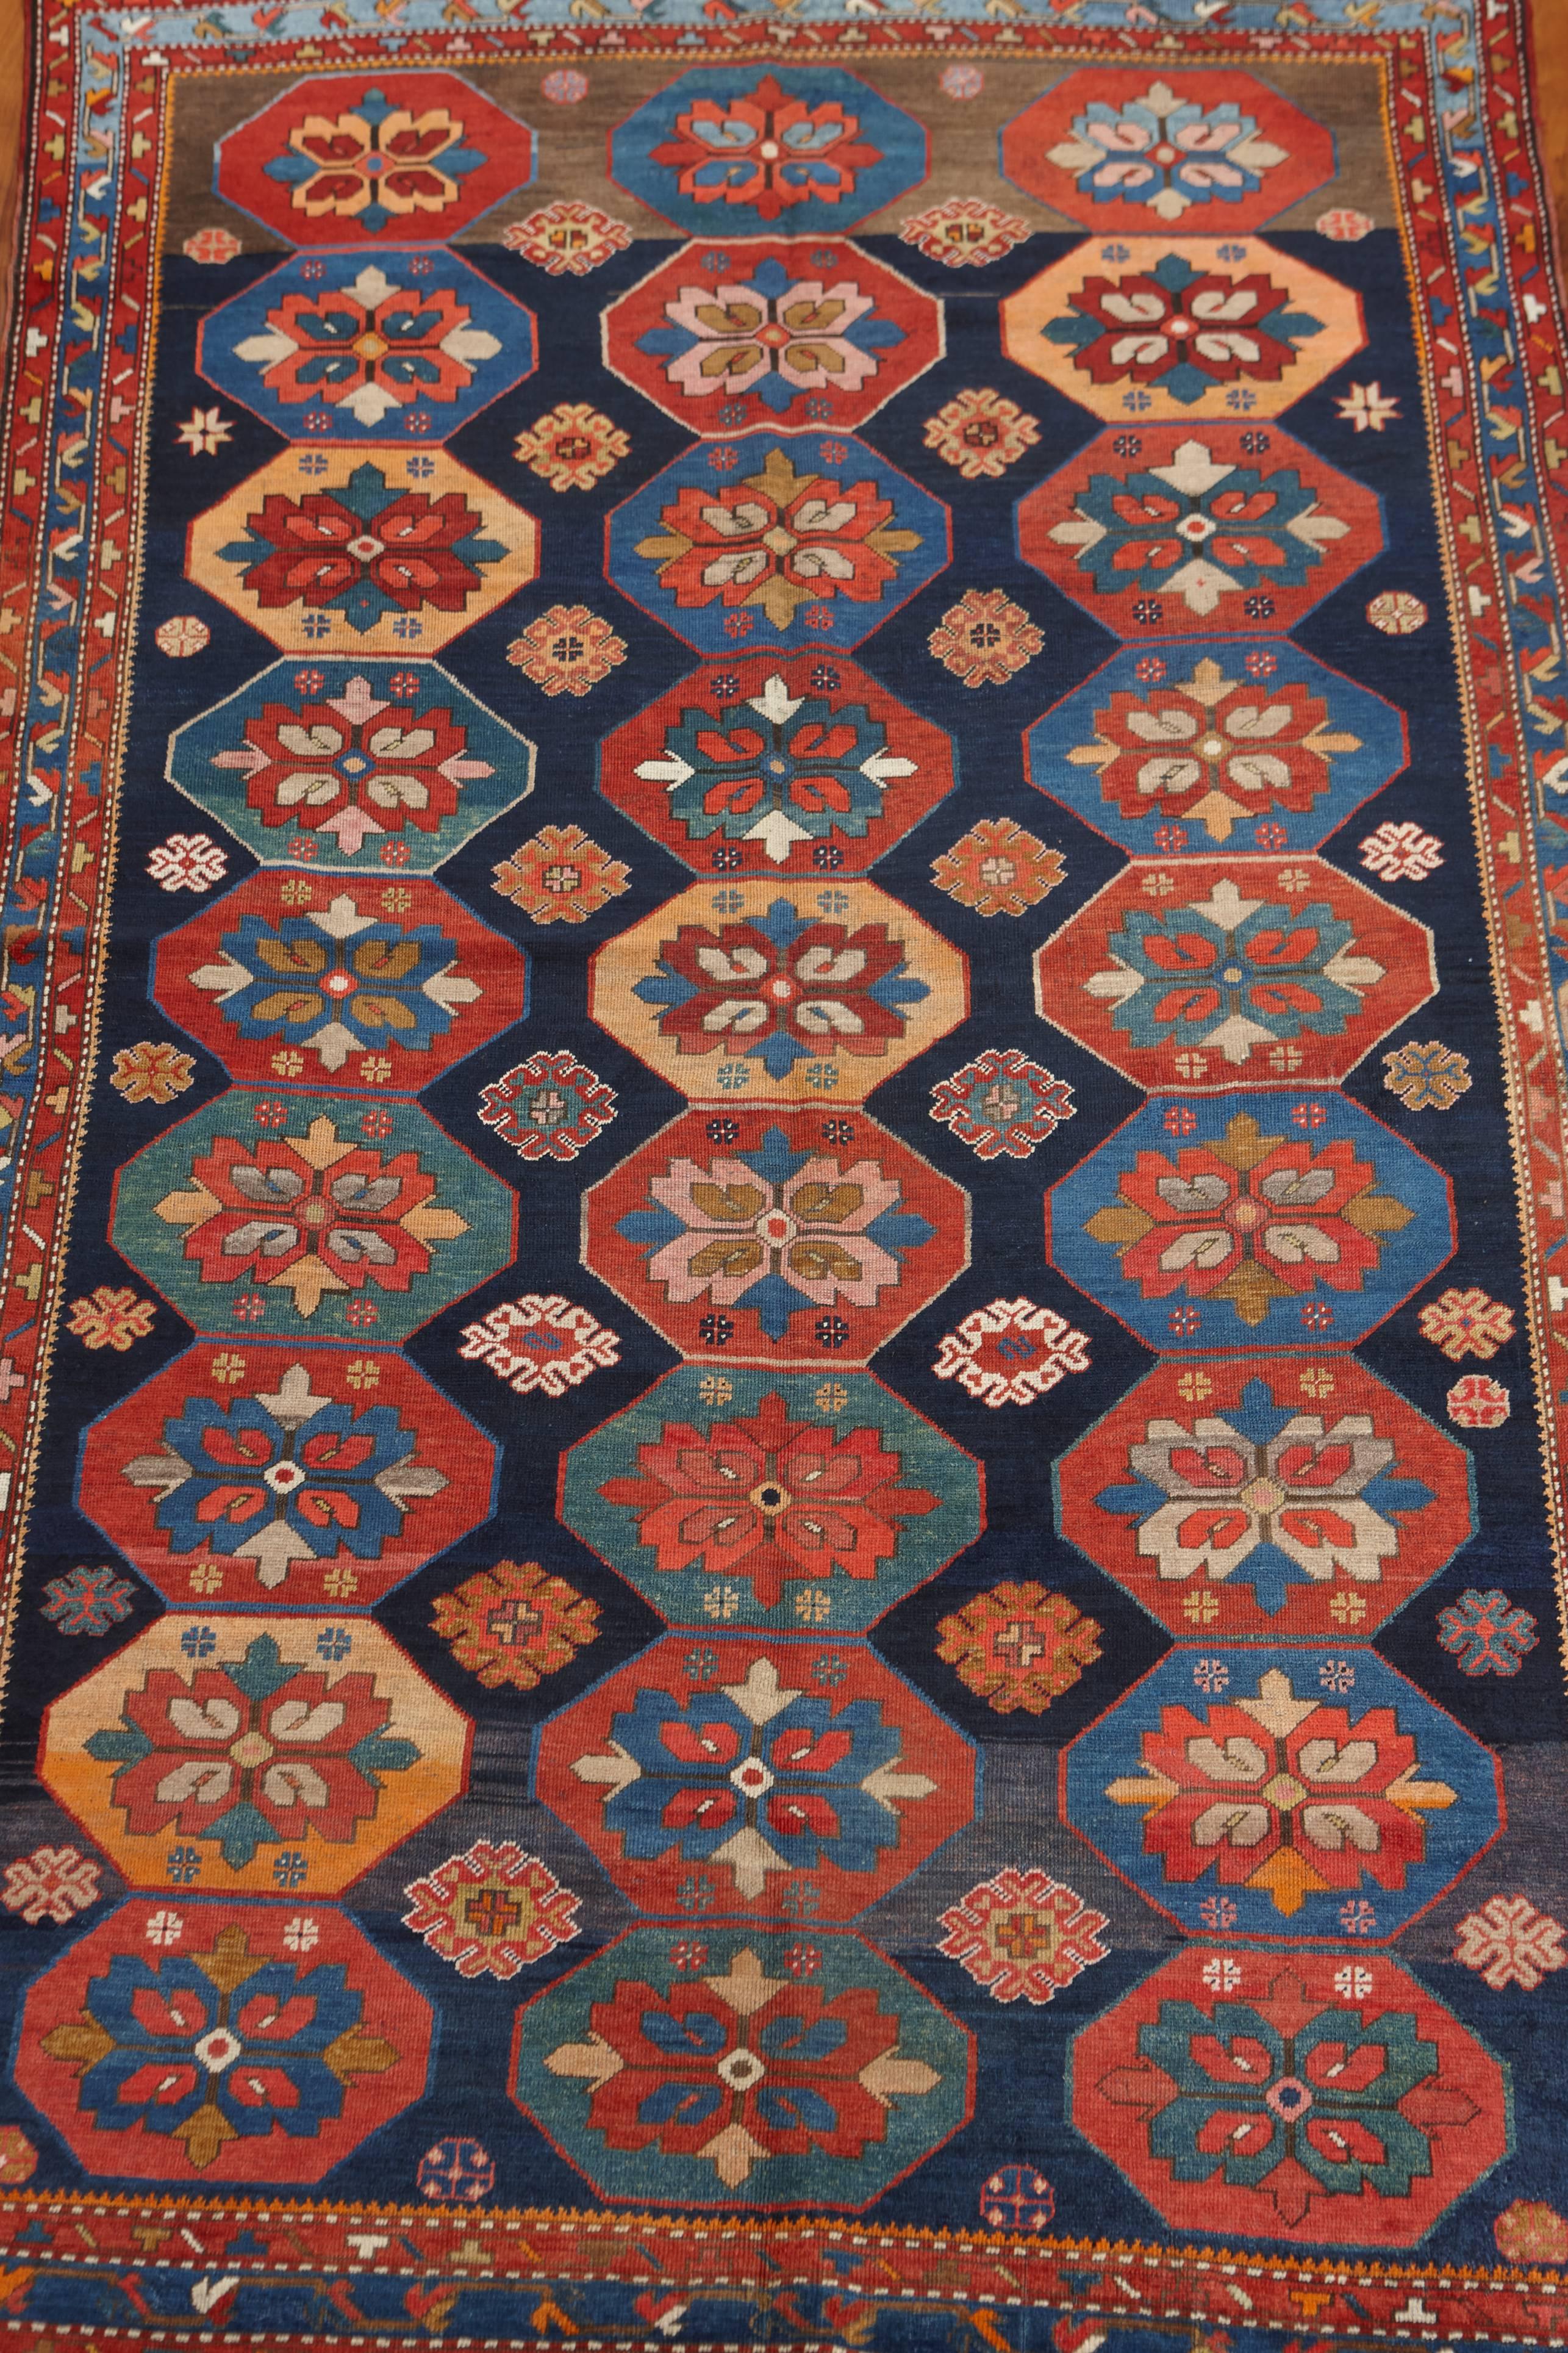 A field of polychrome octagonal medallions are lined along the midnight blue background of this Karabagh rug. Each octagon is inscribed with flowers and four mini-rosettes on its ends. The rug is characterized by rare abrash tonal changes at both of